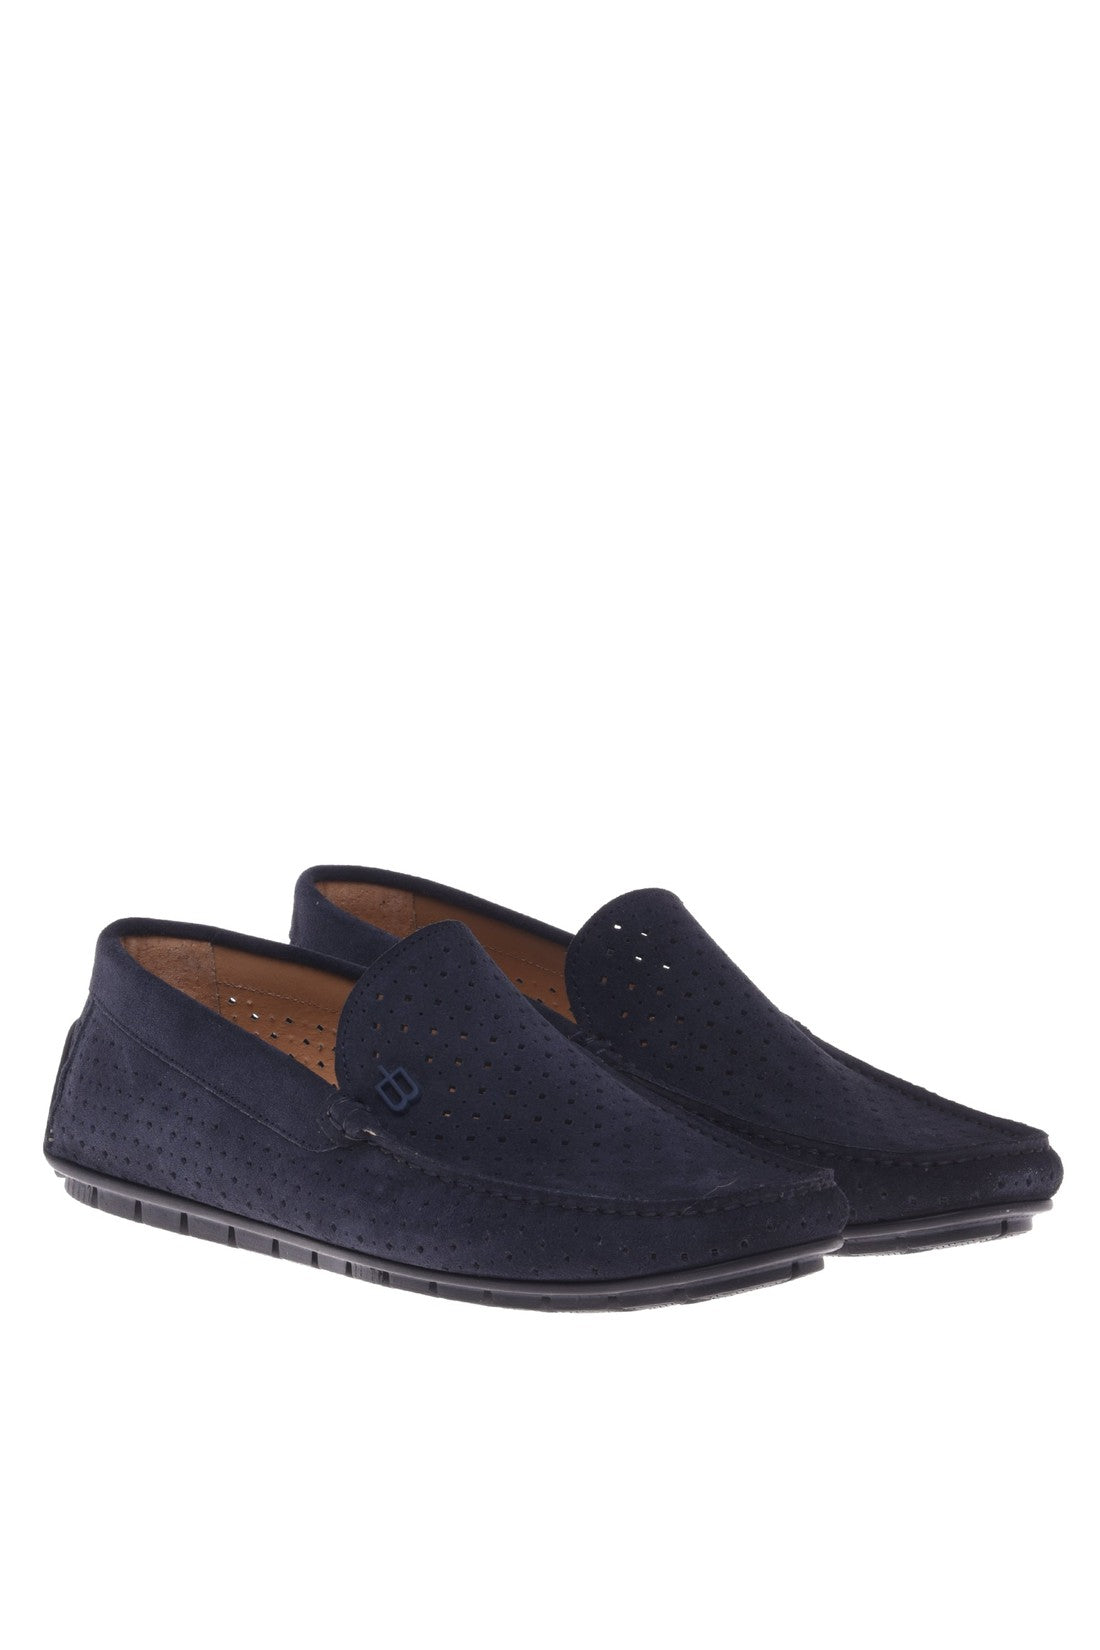 Loafer in blue perforated suede